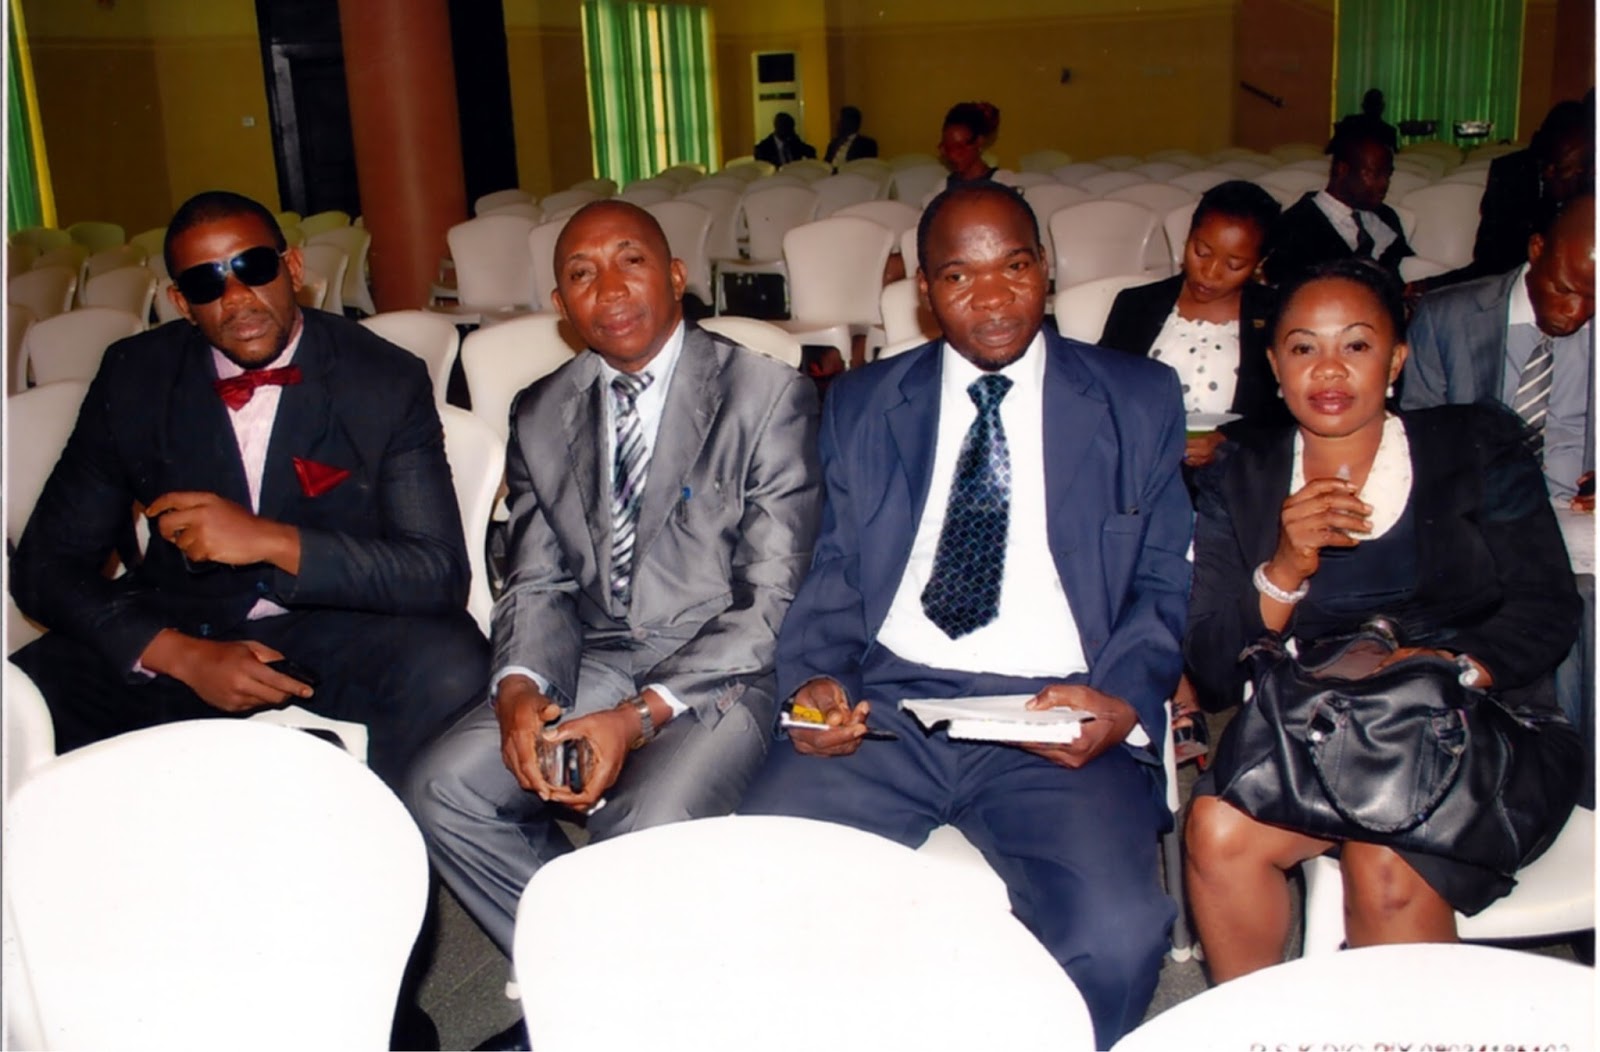 Lawyers during a seminar